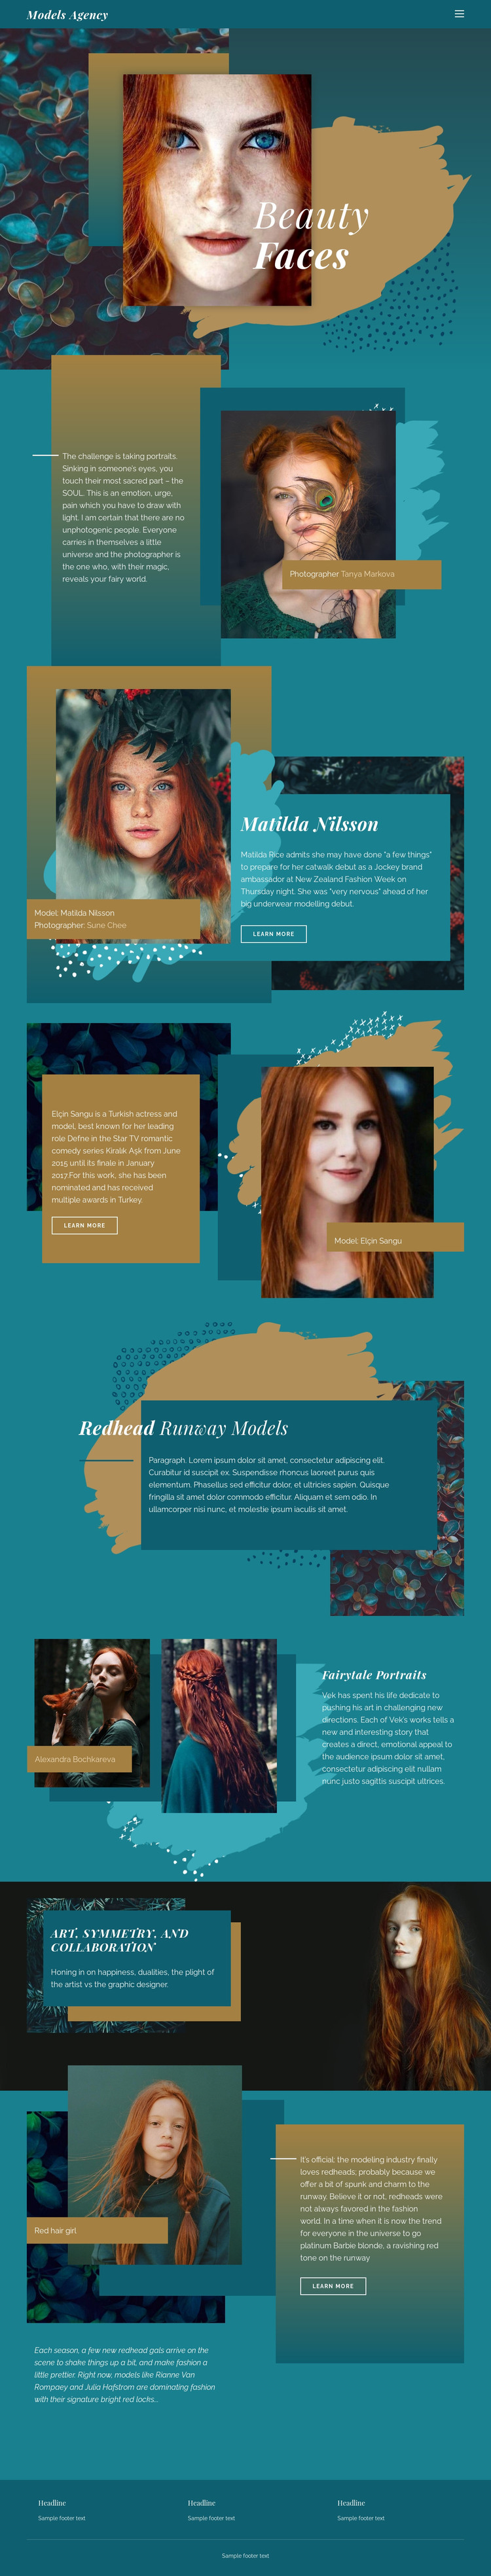 Faces of modern fashion Homepage Design